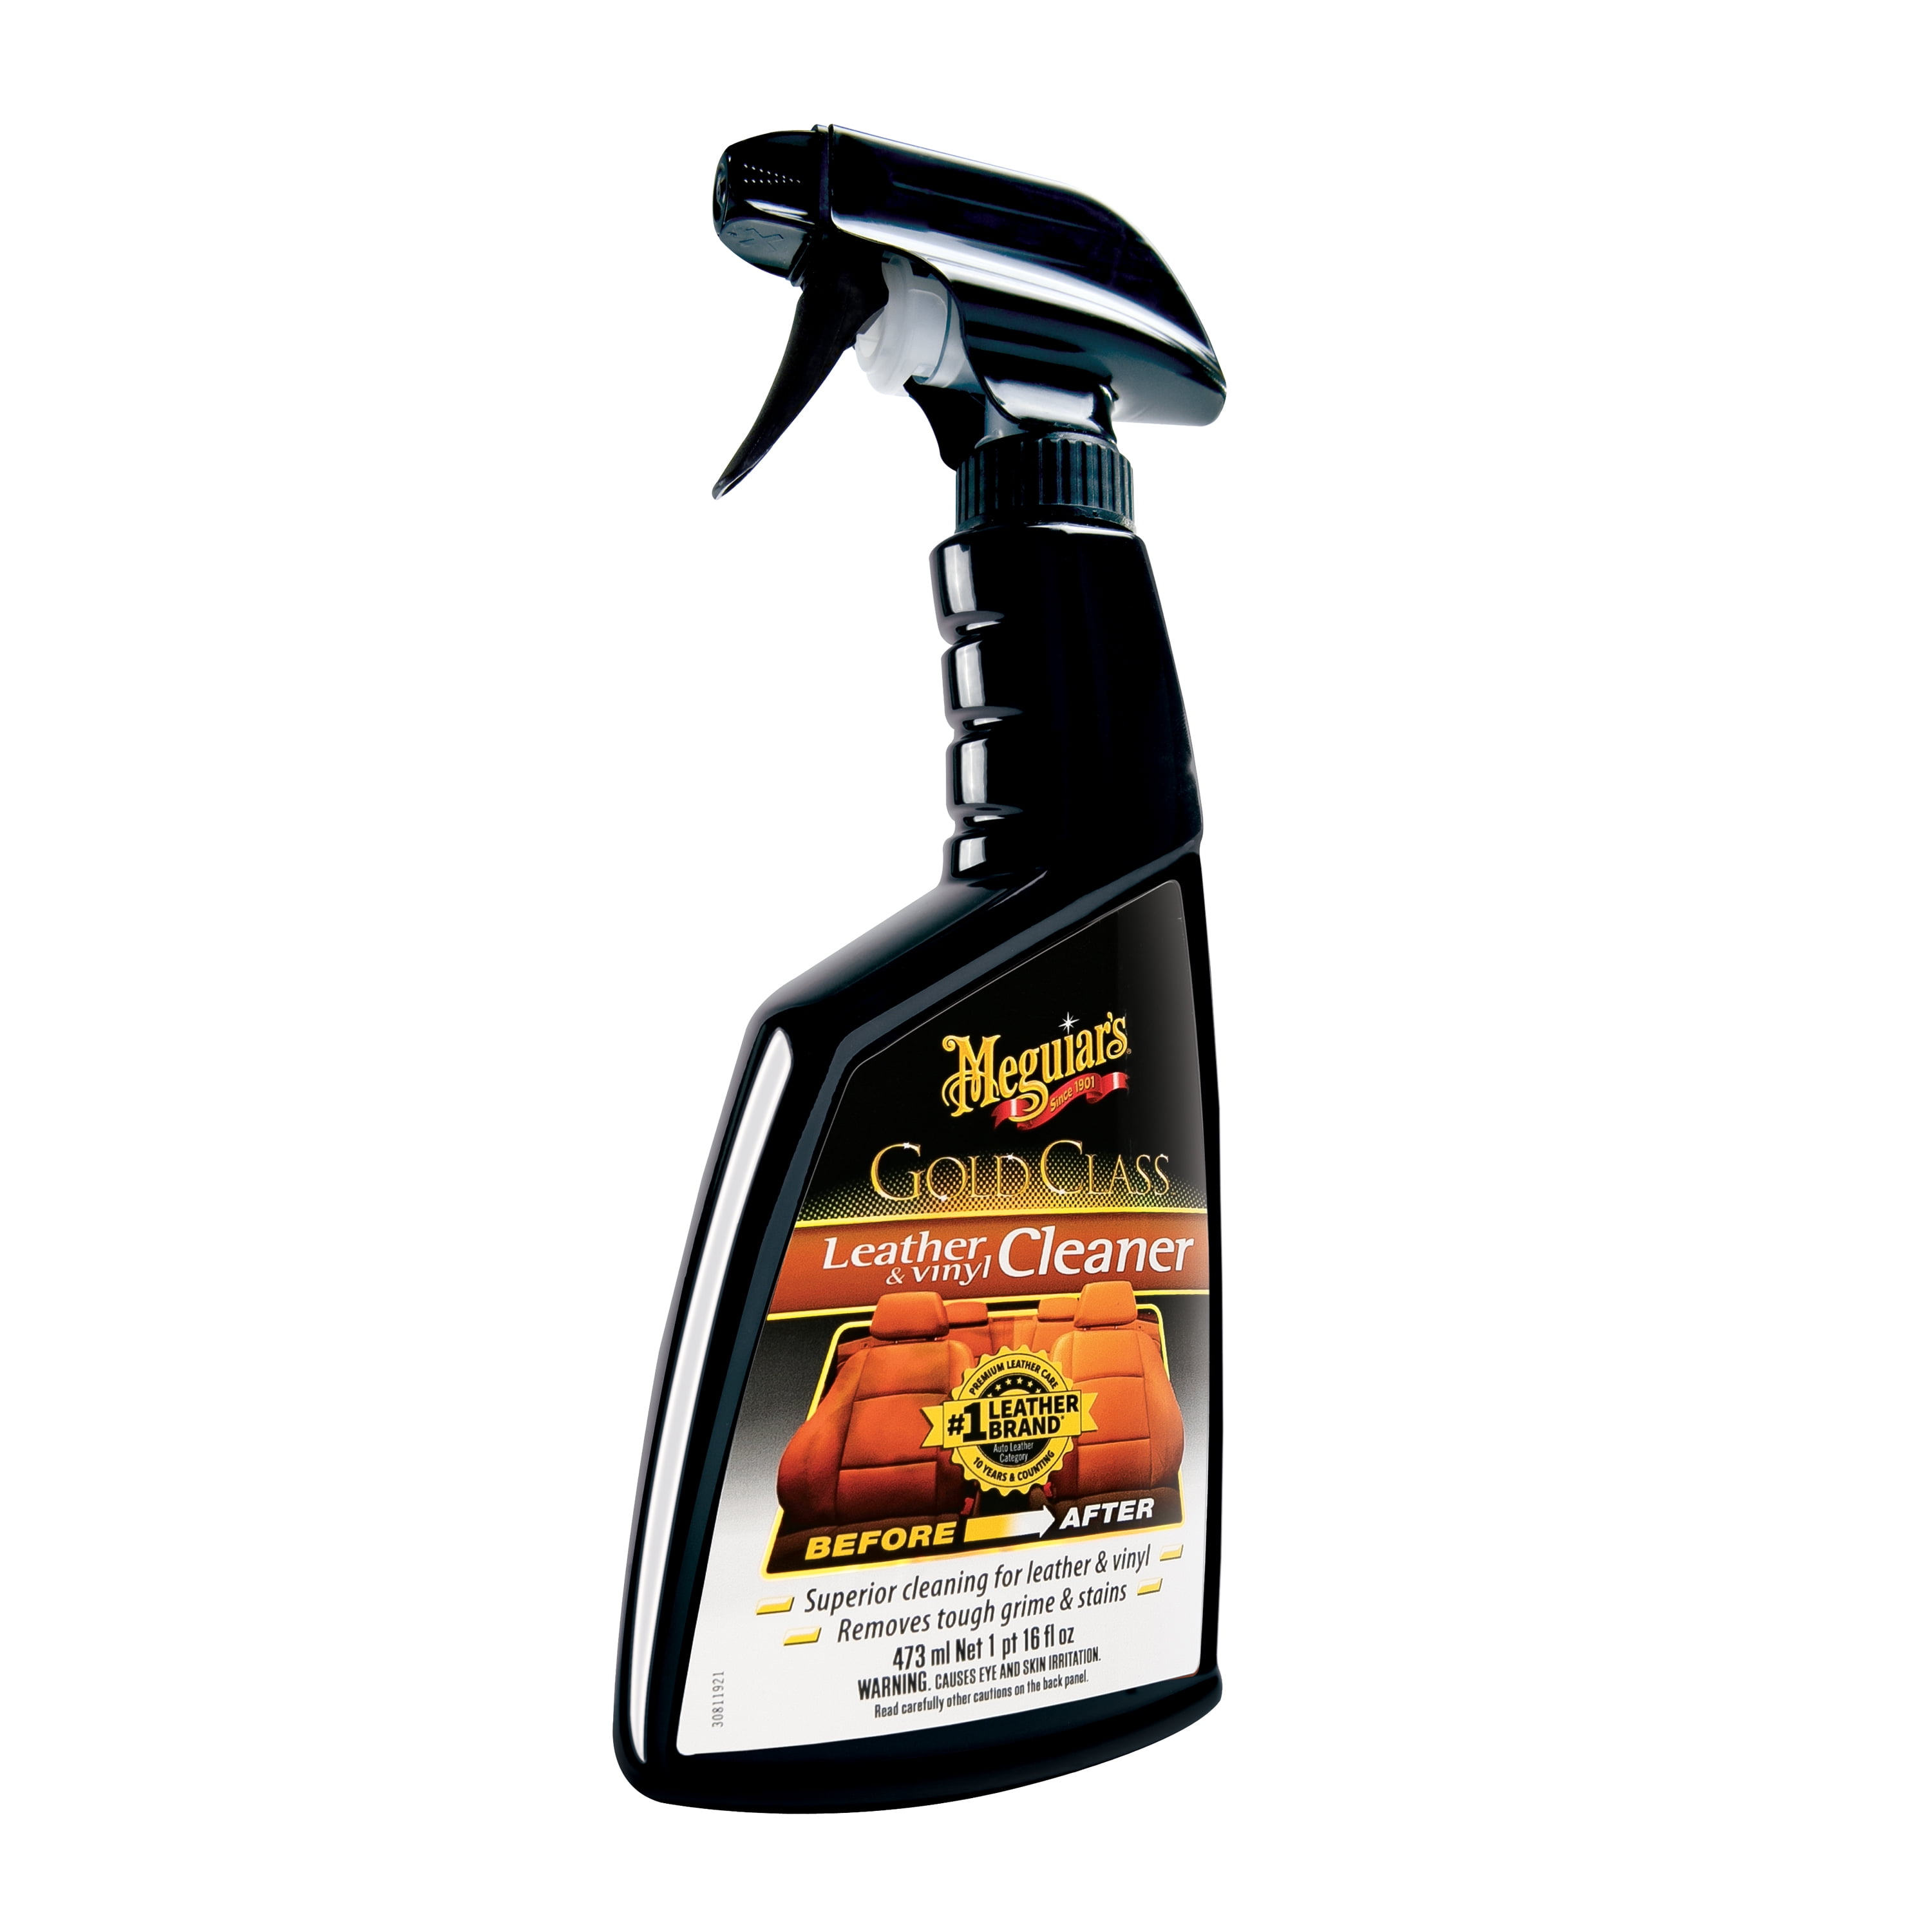 Plastic and Trim Restorer Spray Restores, Shines and Protects Your Car's  Plastic, Vinyl and Rubber Surfaces With Molecular Restoration ，Easily  Applies in Minutes 20ml 